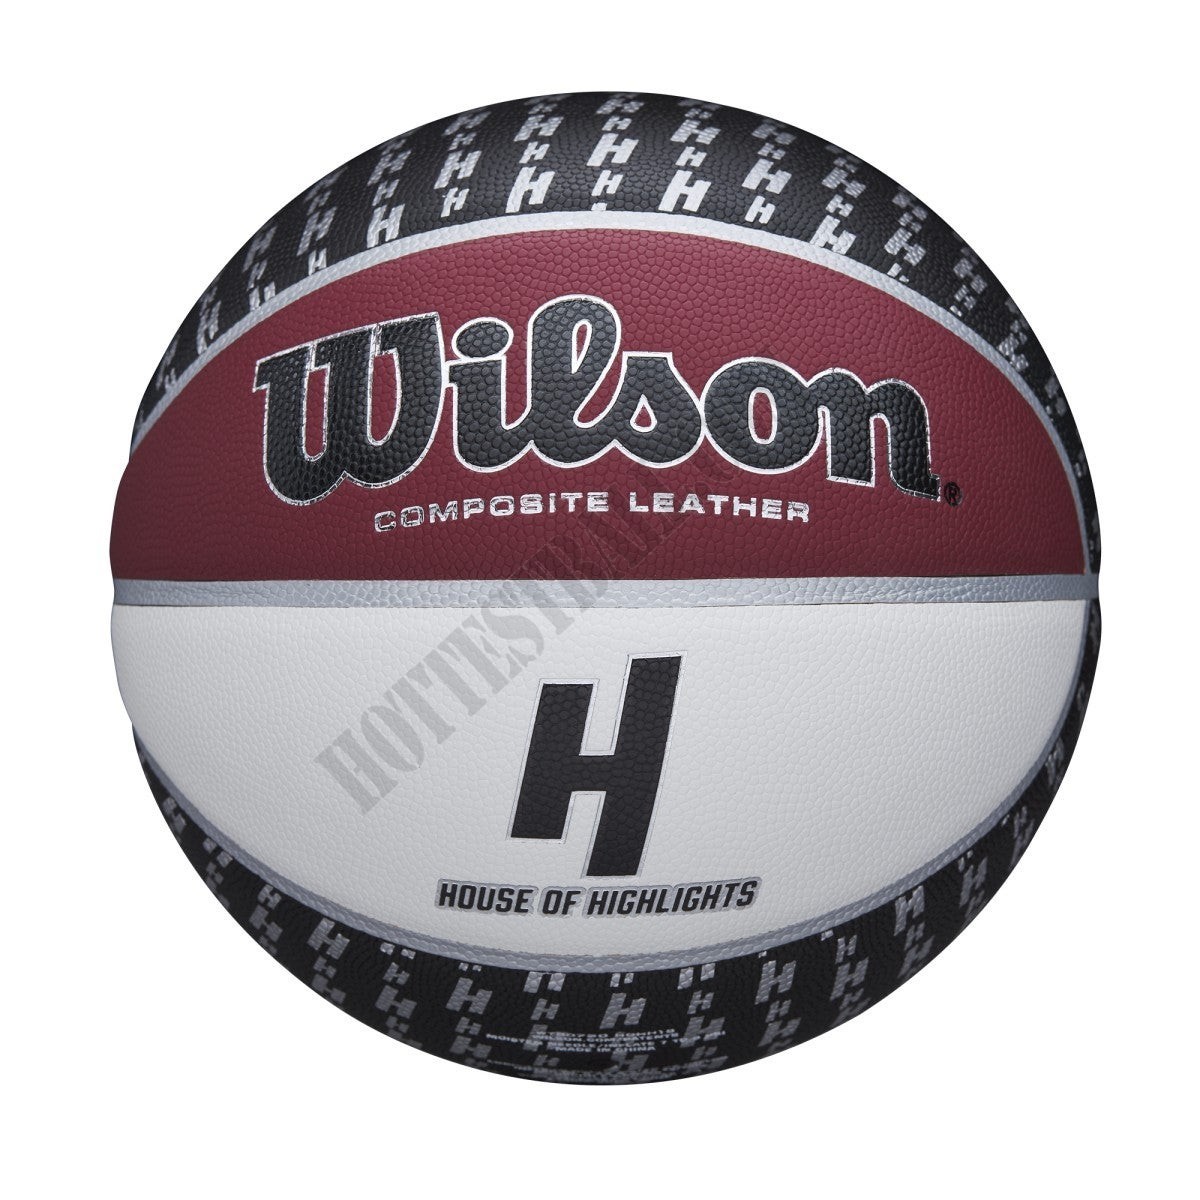 House of Highlights "Holiday Special" Basketball - Wilson Discount Store - -4